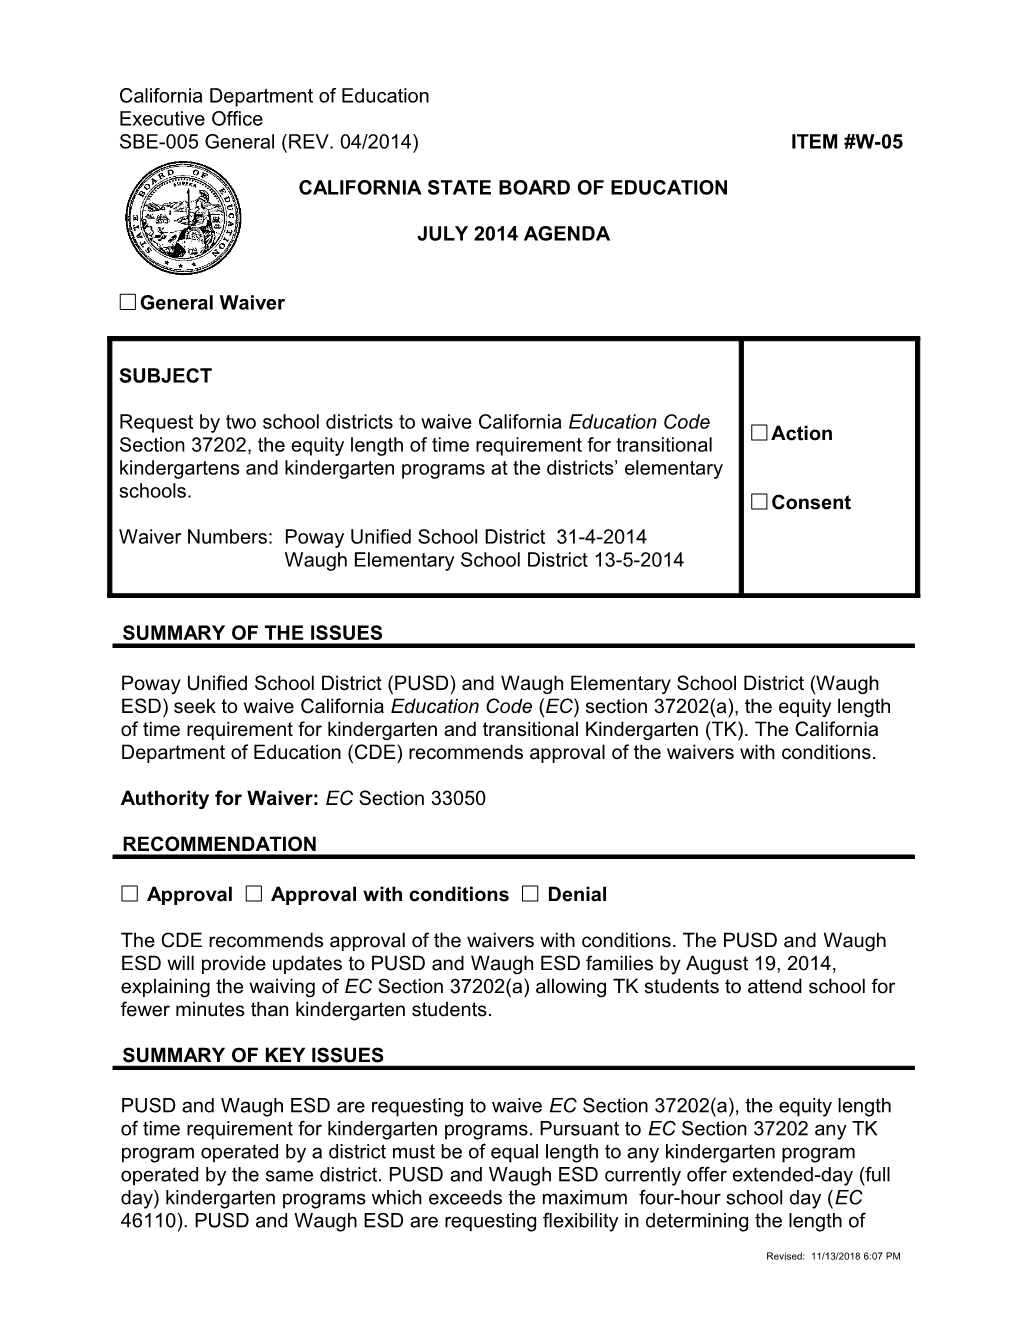 July 2014 Waiver Item W-05 - Meeting Agendas (CA State Board of Education)